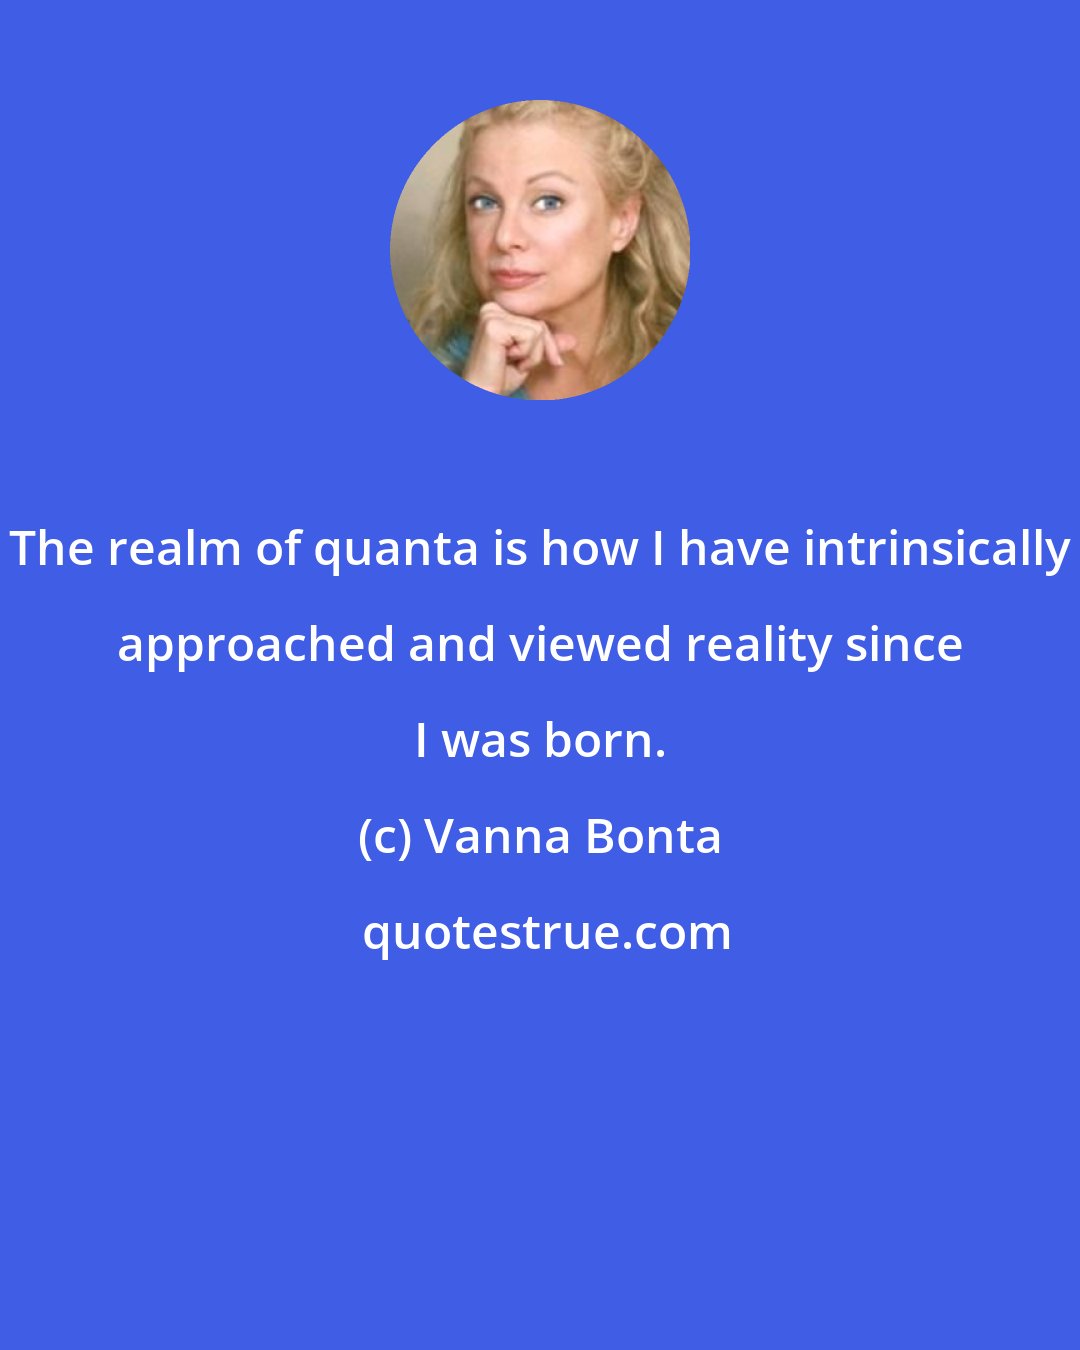 Vanna Bonta: The realm of quanta is how I have intrinsically approached and viewed reality since I was born.